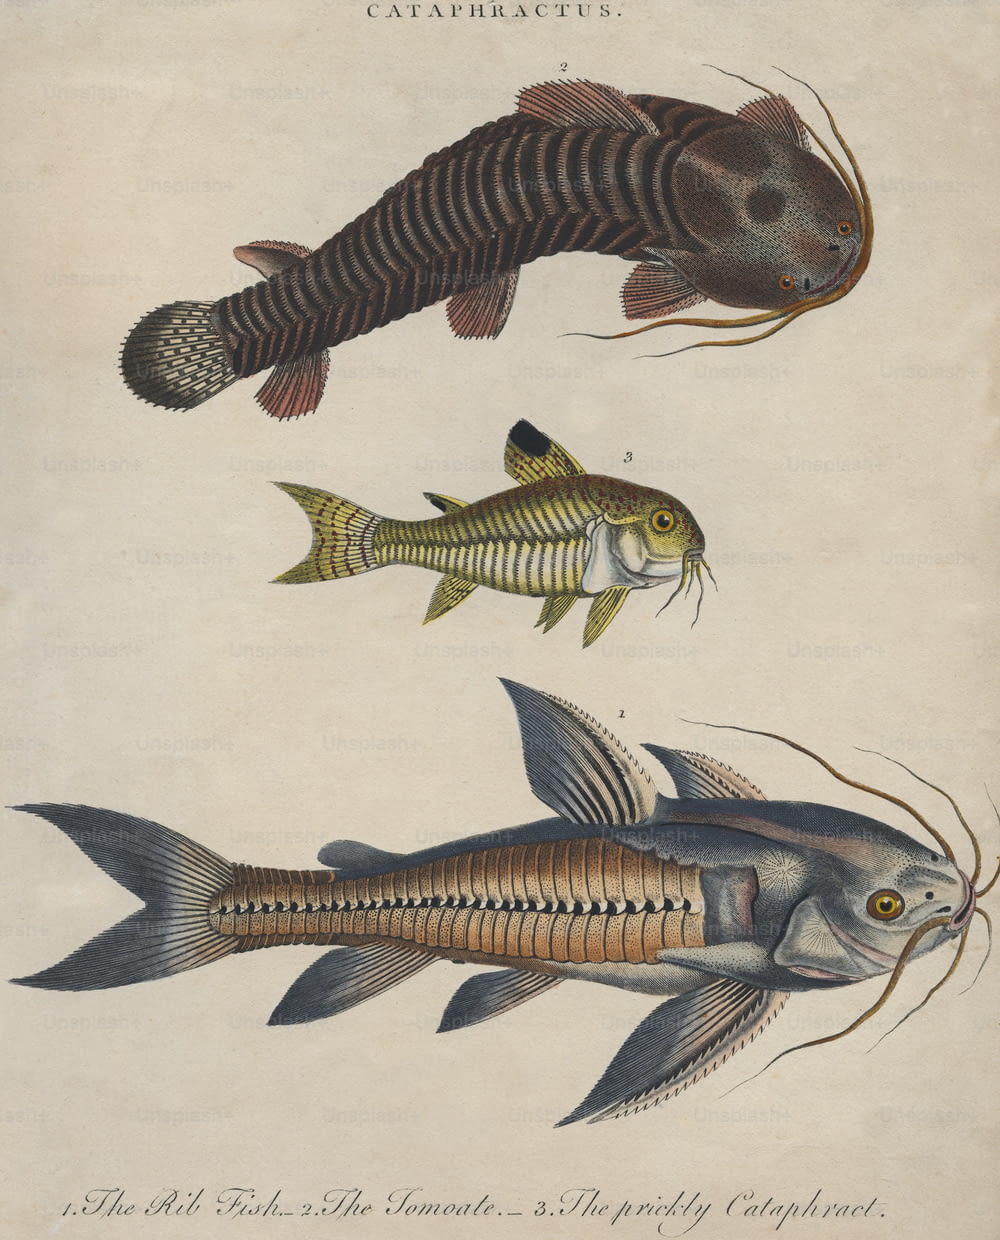 Three species of catfish, circa 1800. From top to bottom, a tomoate, a prickly cataphract and a rib fish. Engraving by J. Pass. (Photo by Hulton Archive/Getty Images)